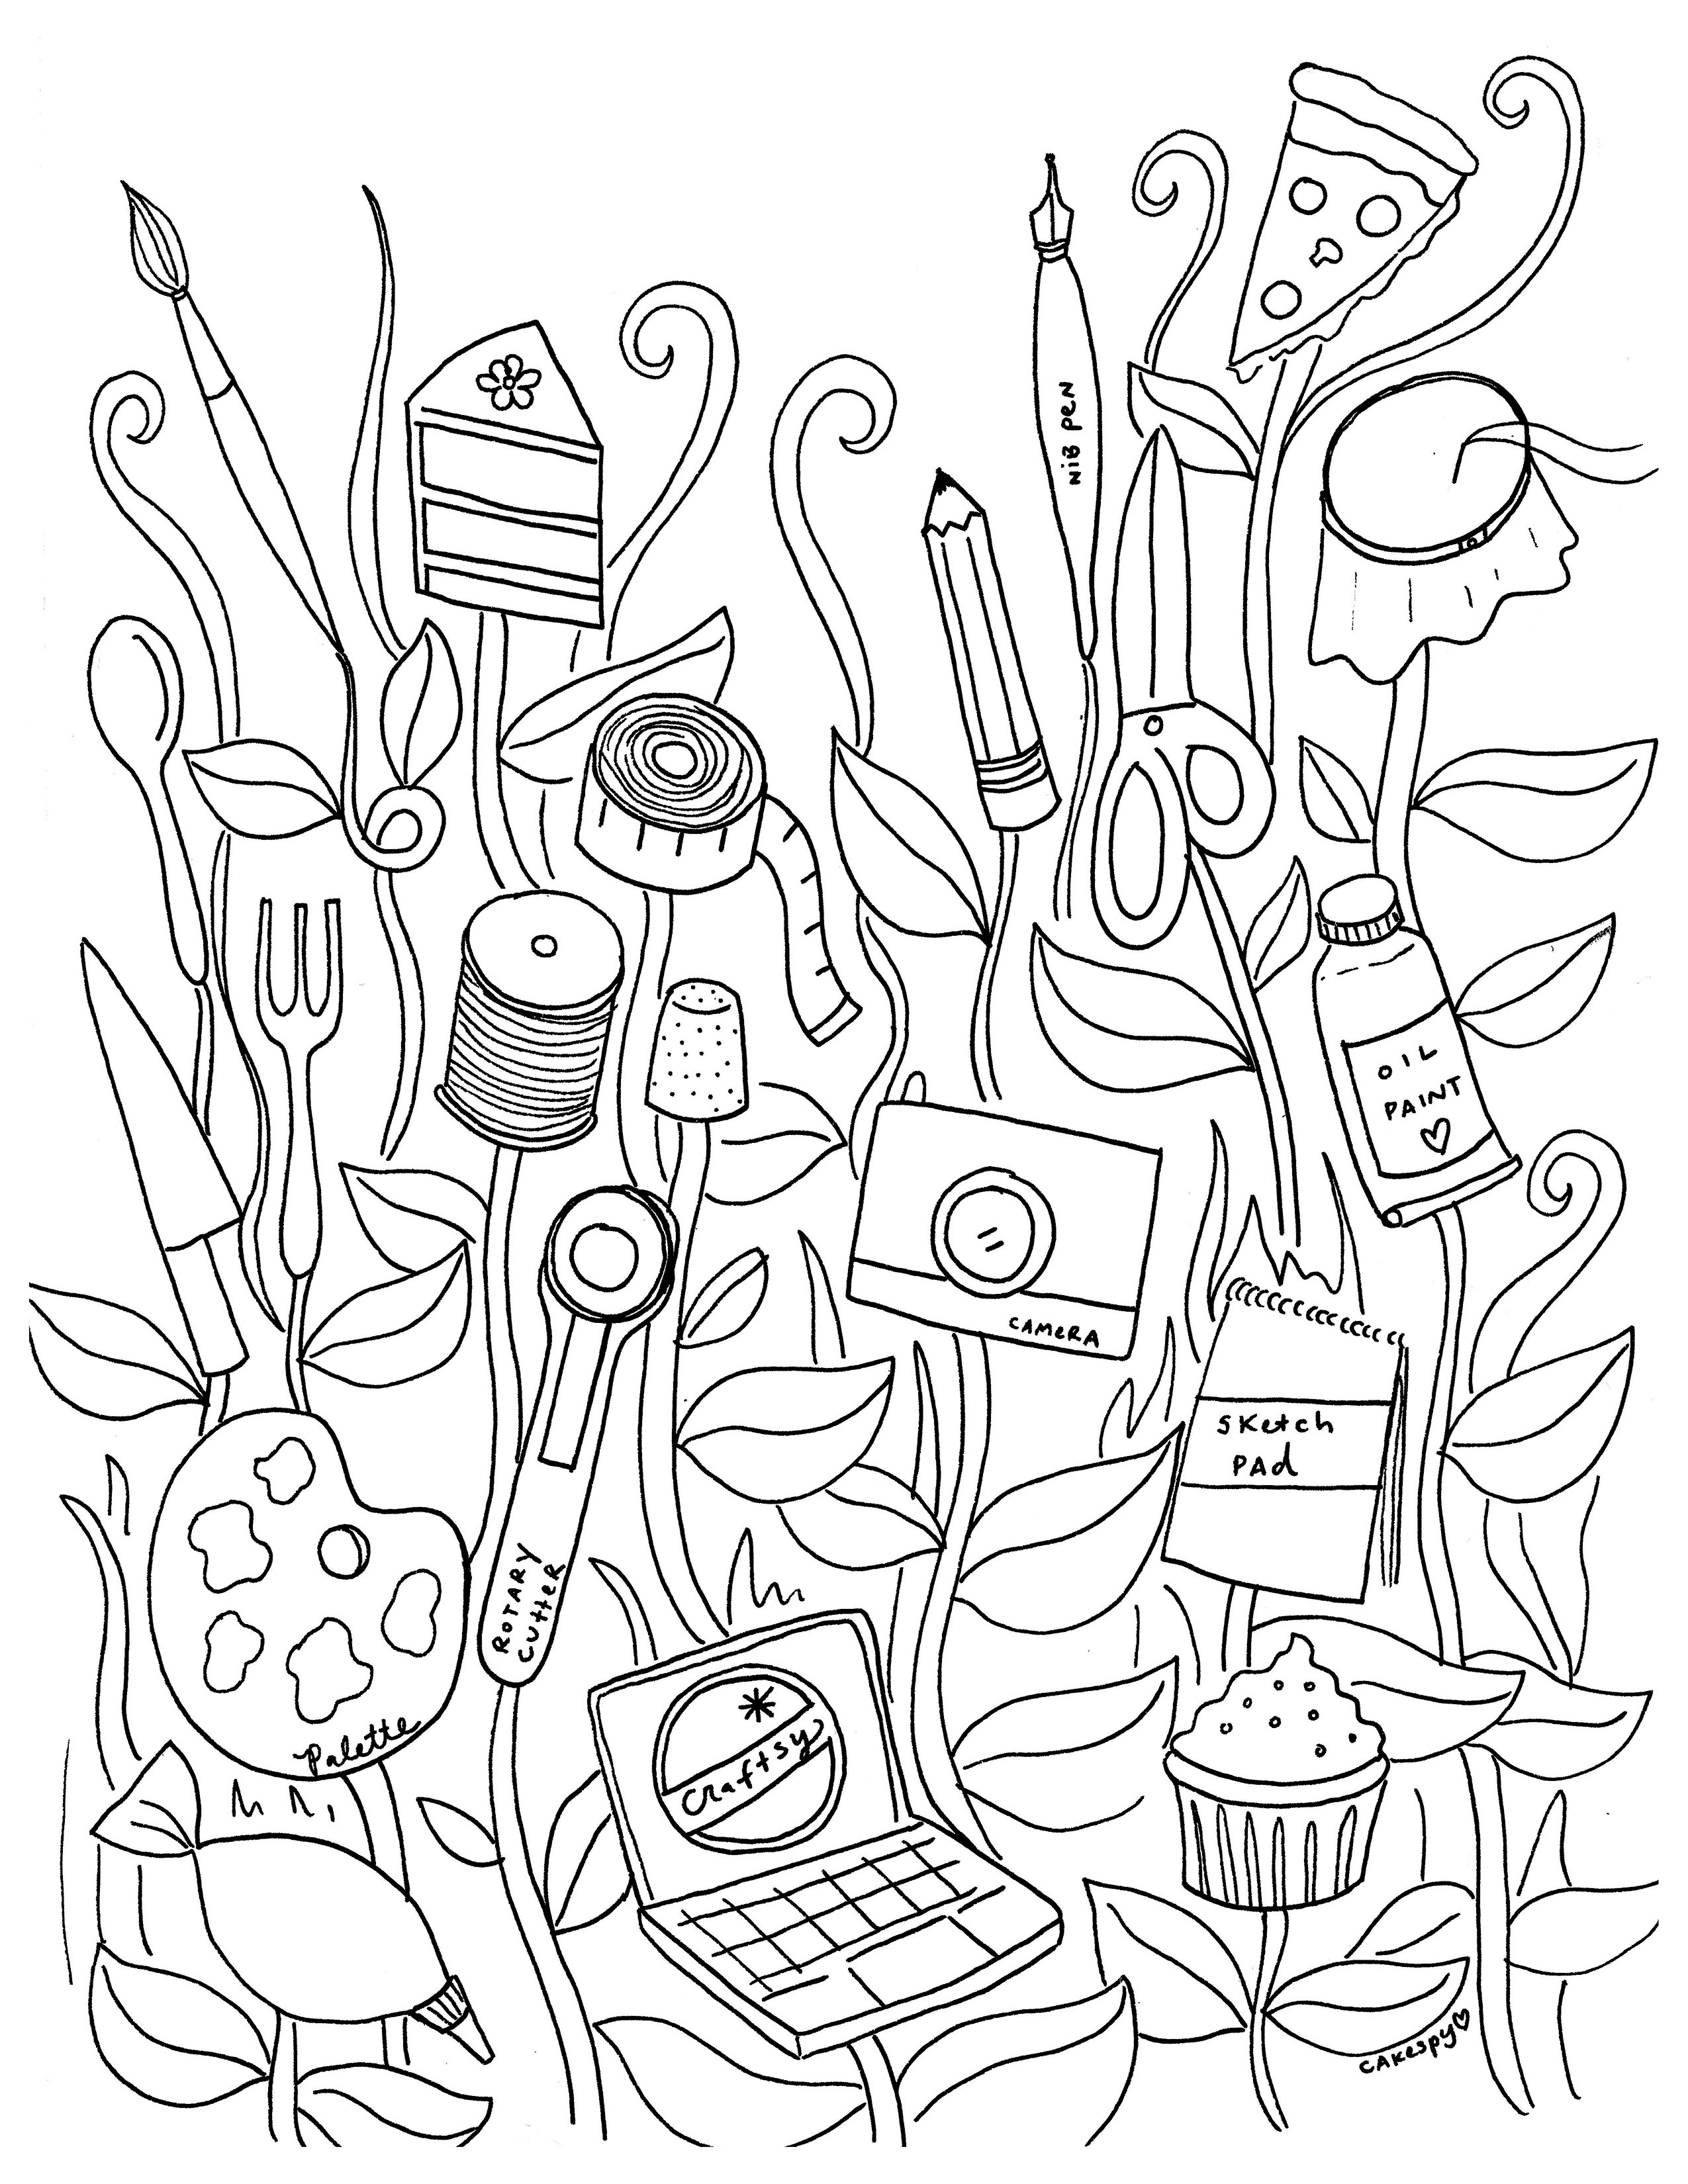 Art Coloring Book For Adults
 Free Coloring Book Pages for Adults